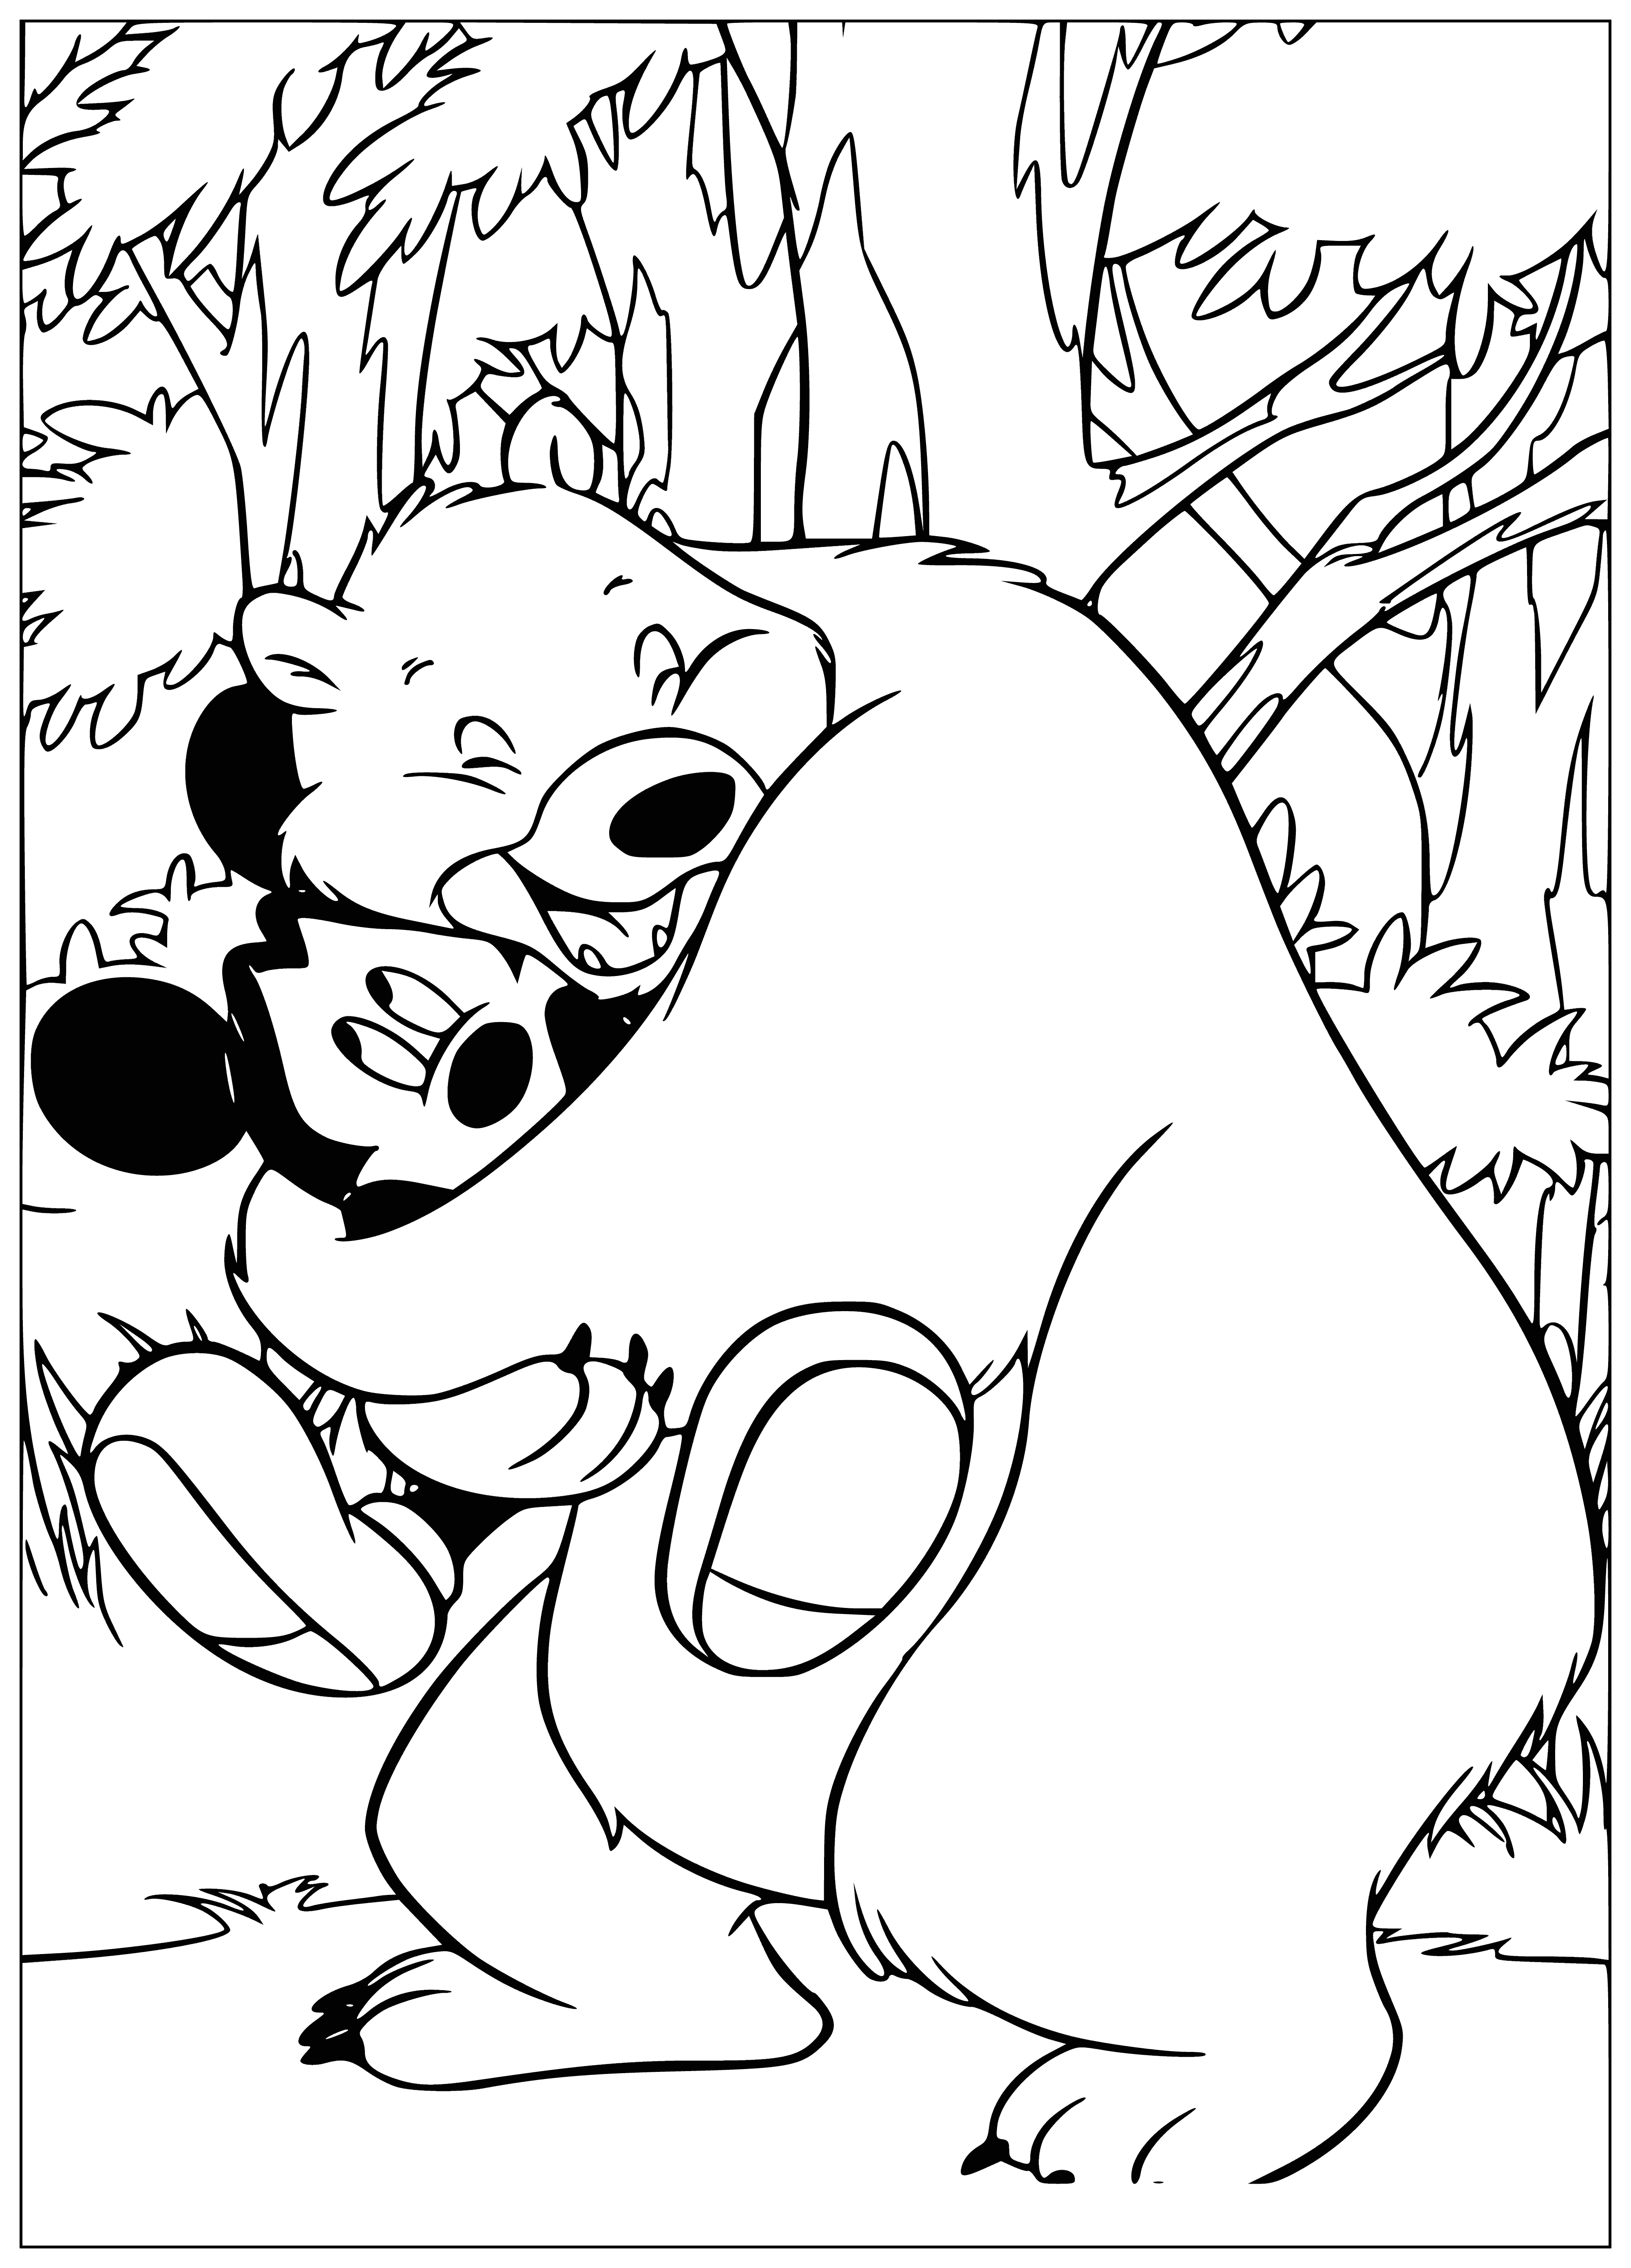 coloring page: Many Mickey Mouse-eared bears surround a large, white bear at the center of the page. Some are brown, white and black. All look to the big bear.